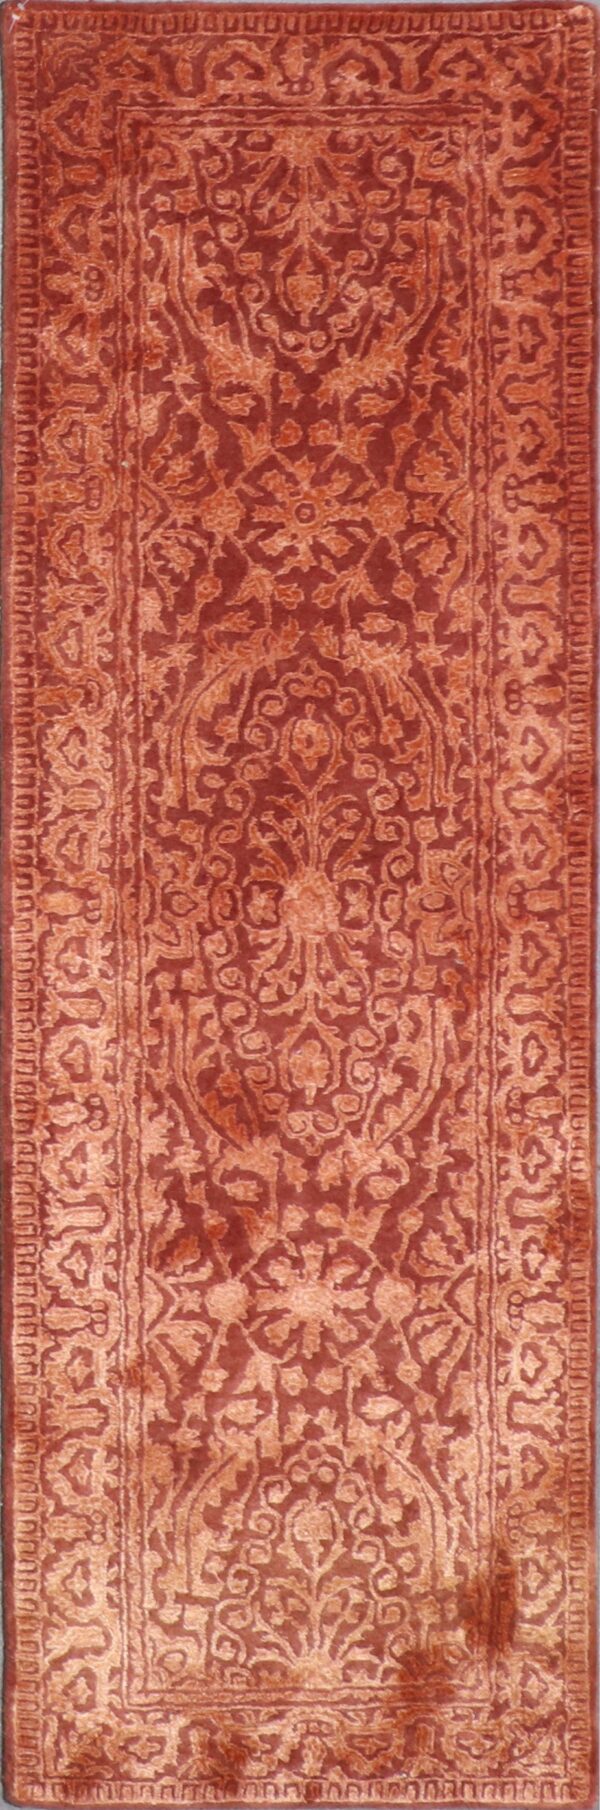 2'8"x7'11" Decorative Wool & Silk Hand-Tufted Rug - Direct Rug Import | Rugs in Chicago, Indiana,South Bend,Granger